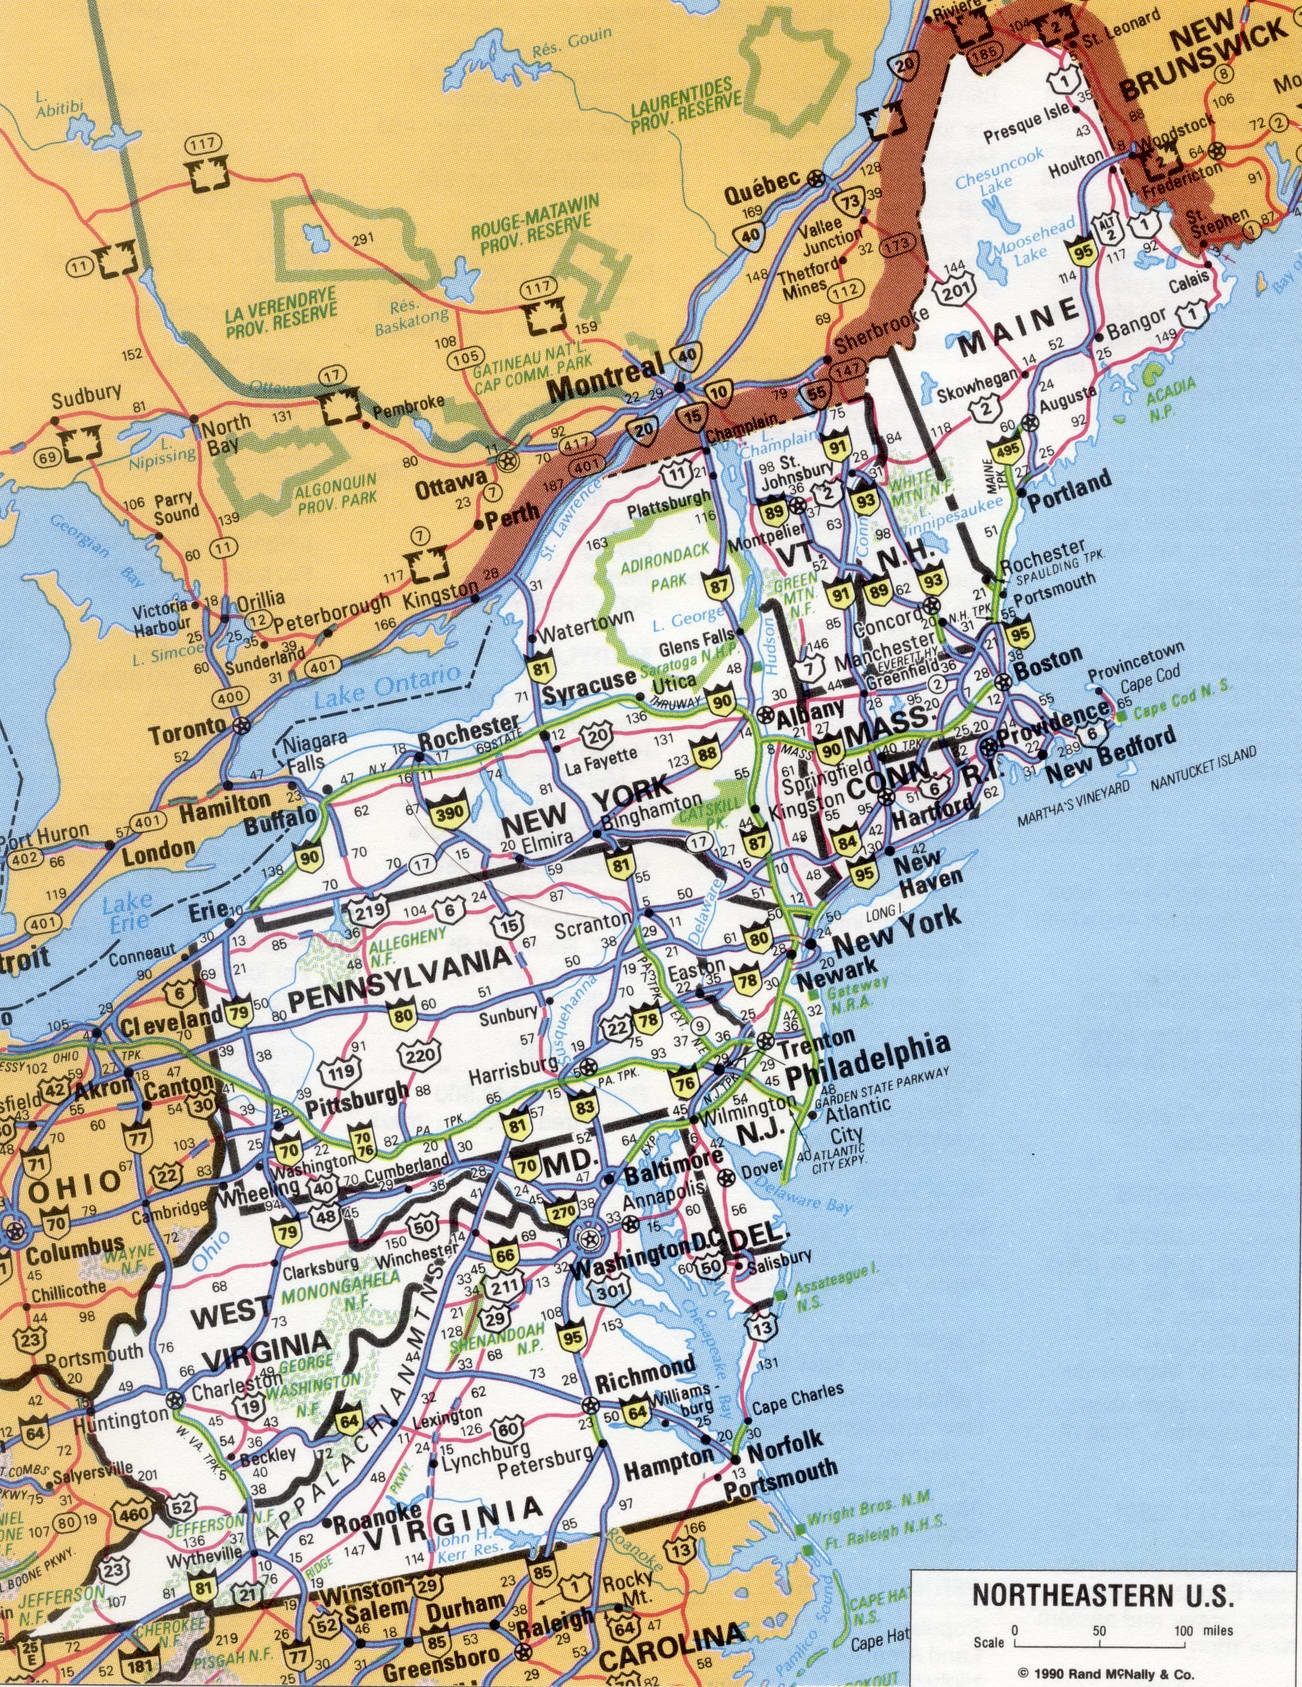 Road Map Of North East Usa Roads map of US. Maps of the United States   highways, cities 